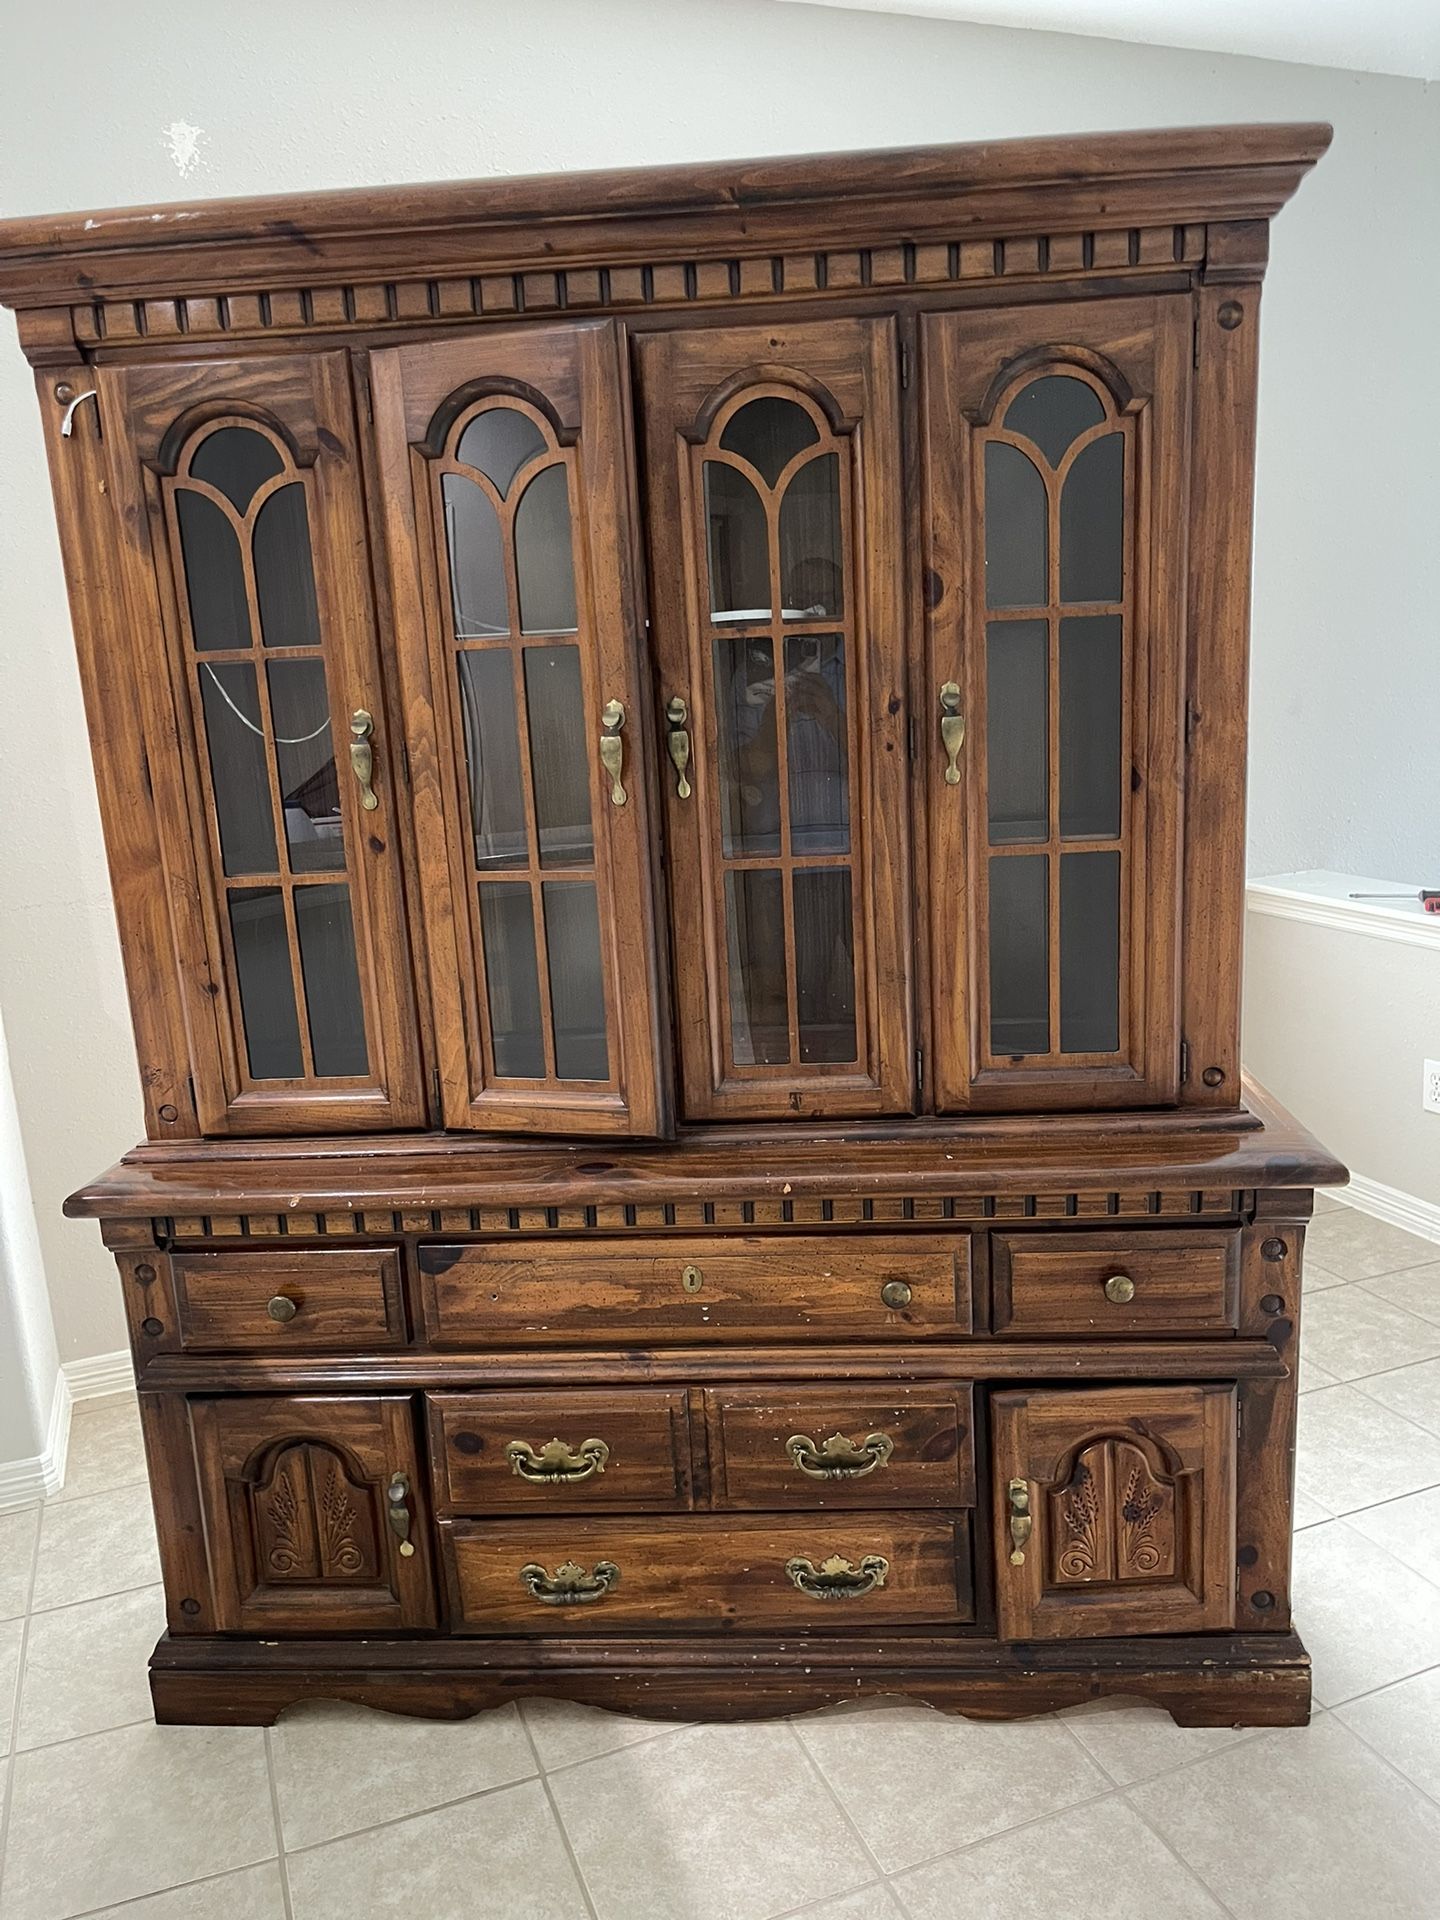 Final Price Drop - China Cabinet Now Just $75.00